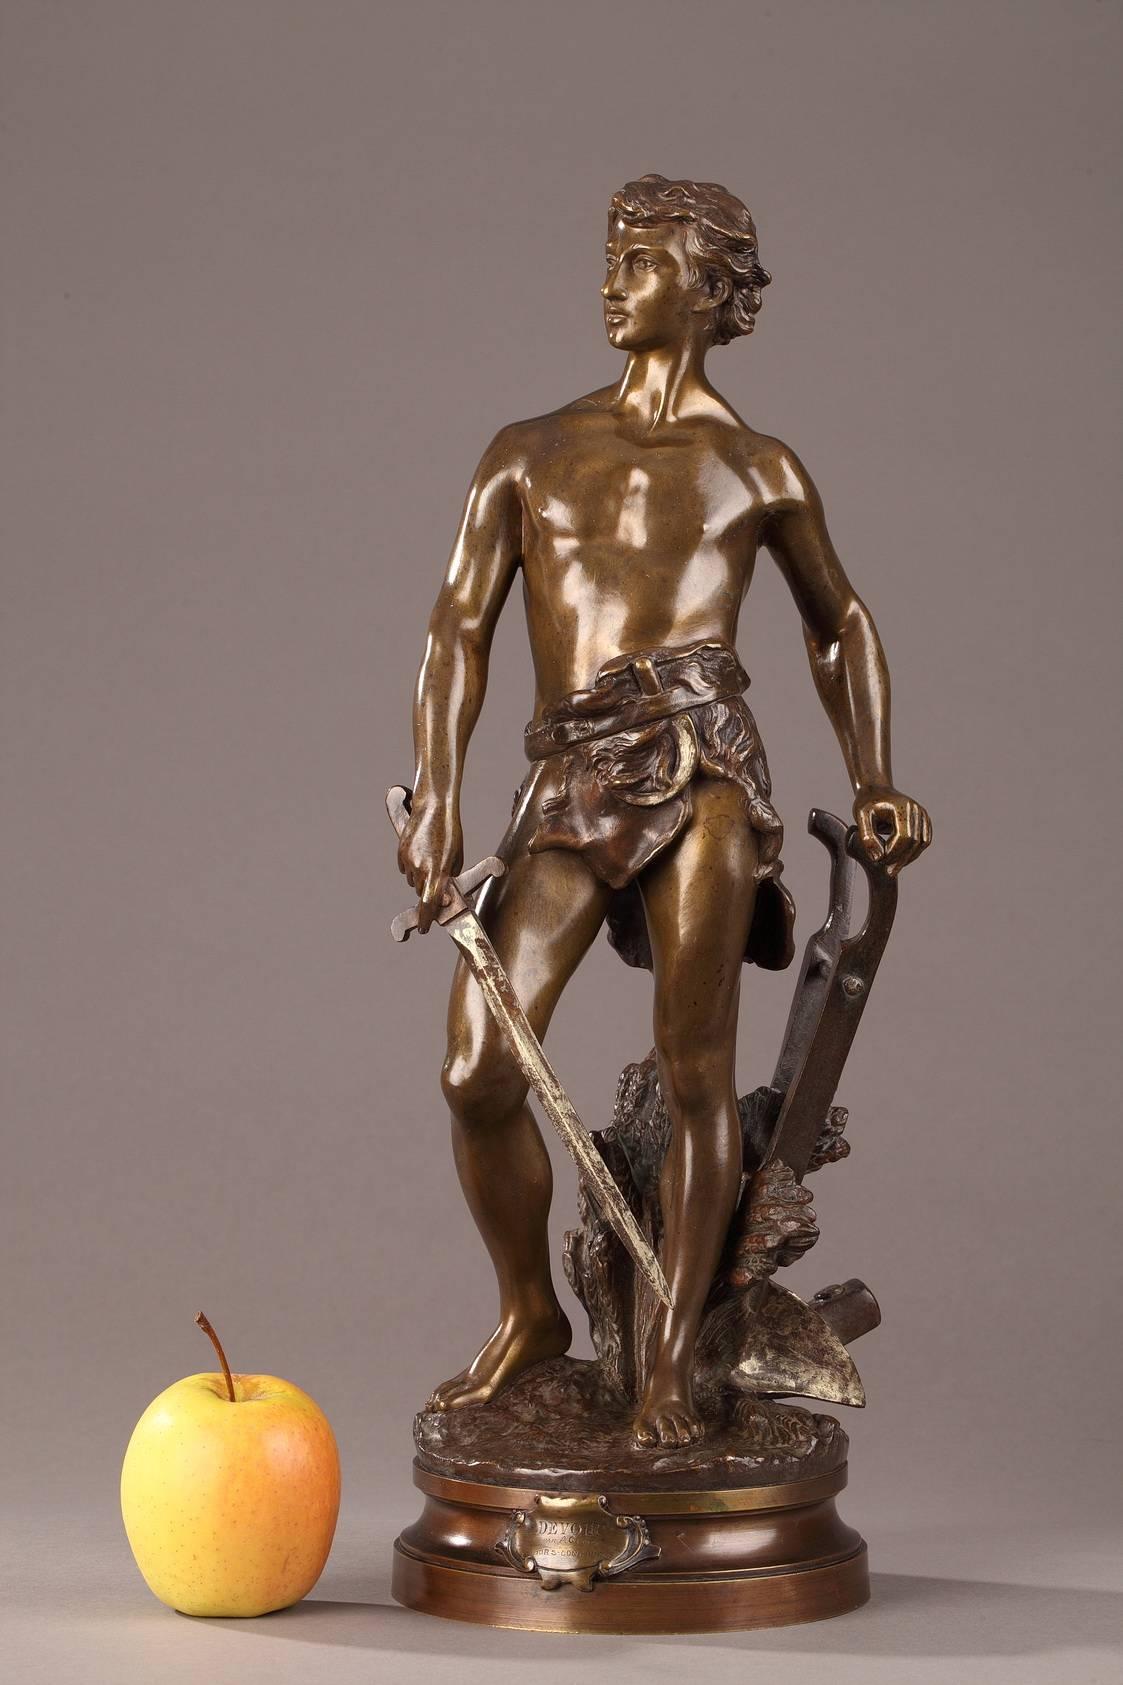 Patinated bronze sculpture titled, “Le Devoir” (Duty) or “Cincinnatus,” by Adrien Etienne Gaudez (1845-1902). It portrays Lucius Quinctius Cincinnatus, a Roman consul who lived around 460 BC and who ascended to power twice, in 458 and 439 BC. Signed